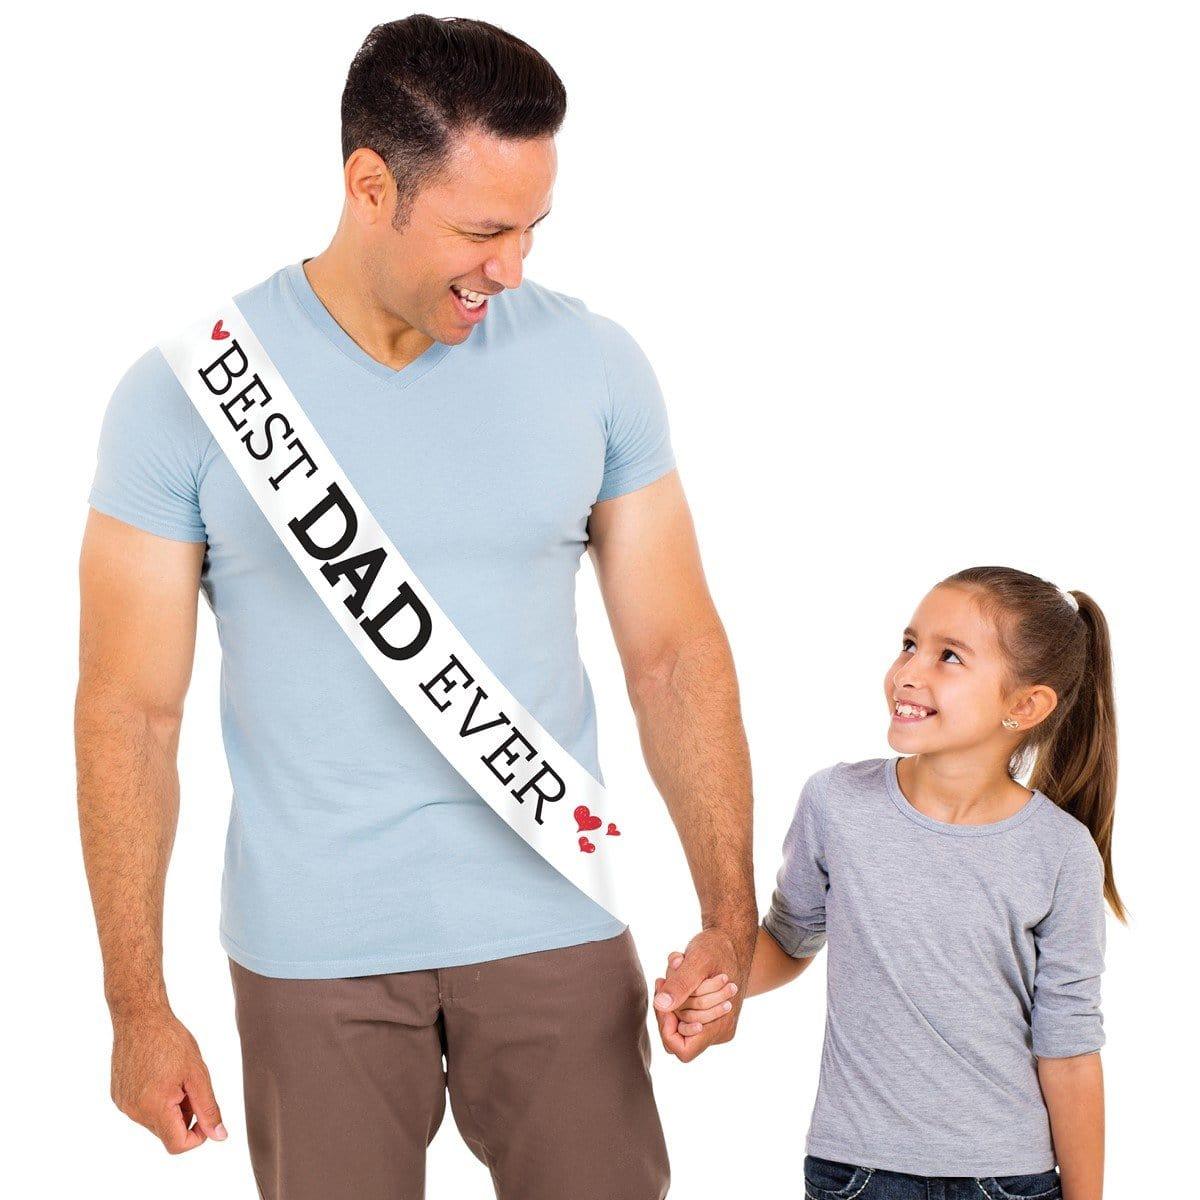 Buy Baby Shower Sash - Best Dad Ever sold at Party Expert